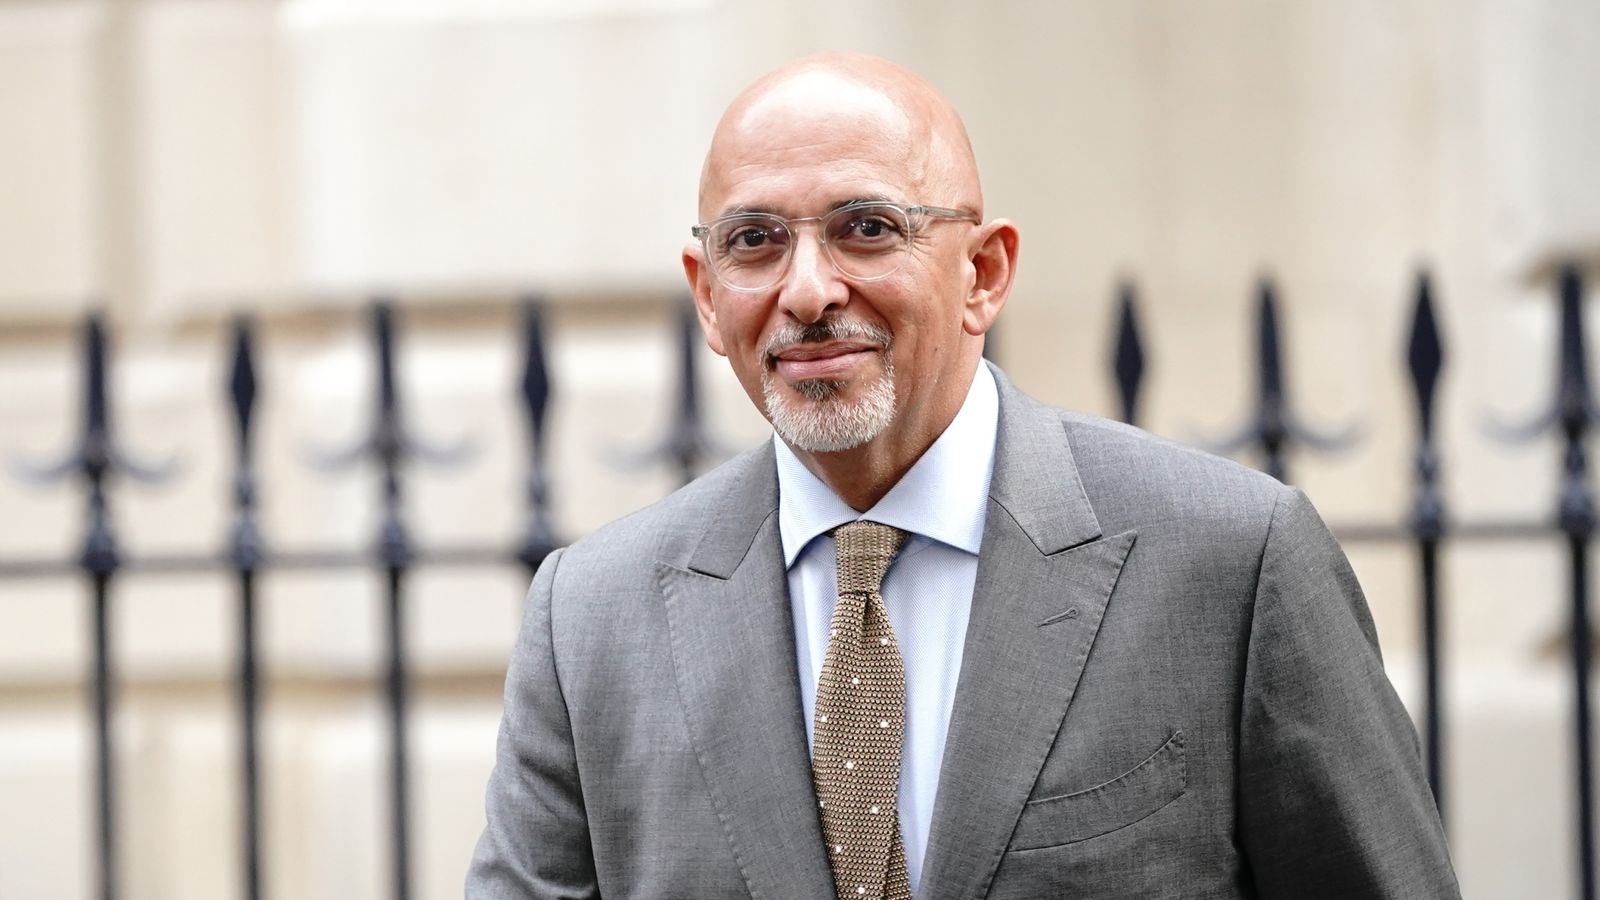 Zahawi takes on Very Group role days after quitting as MP